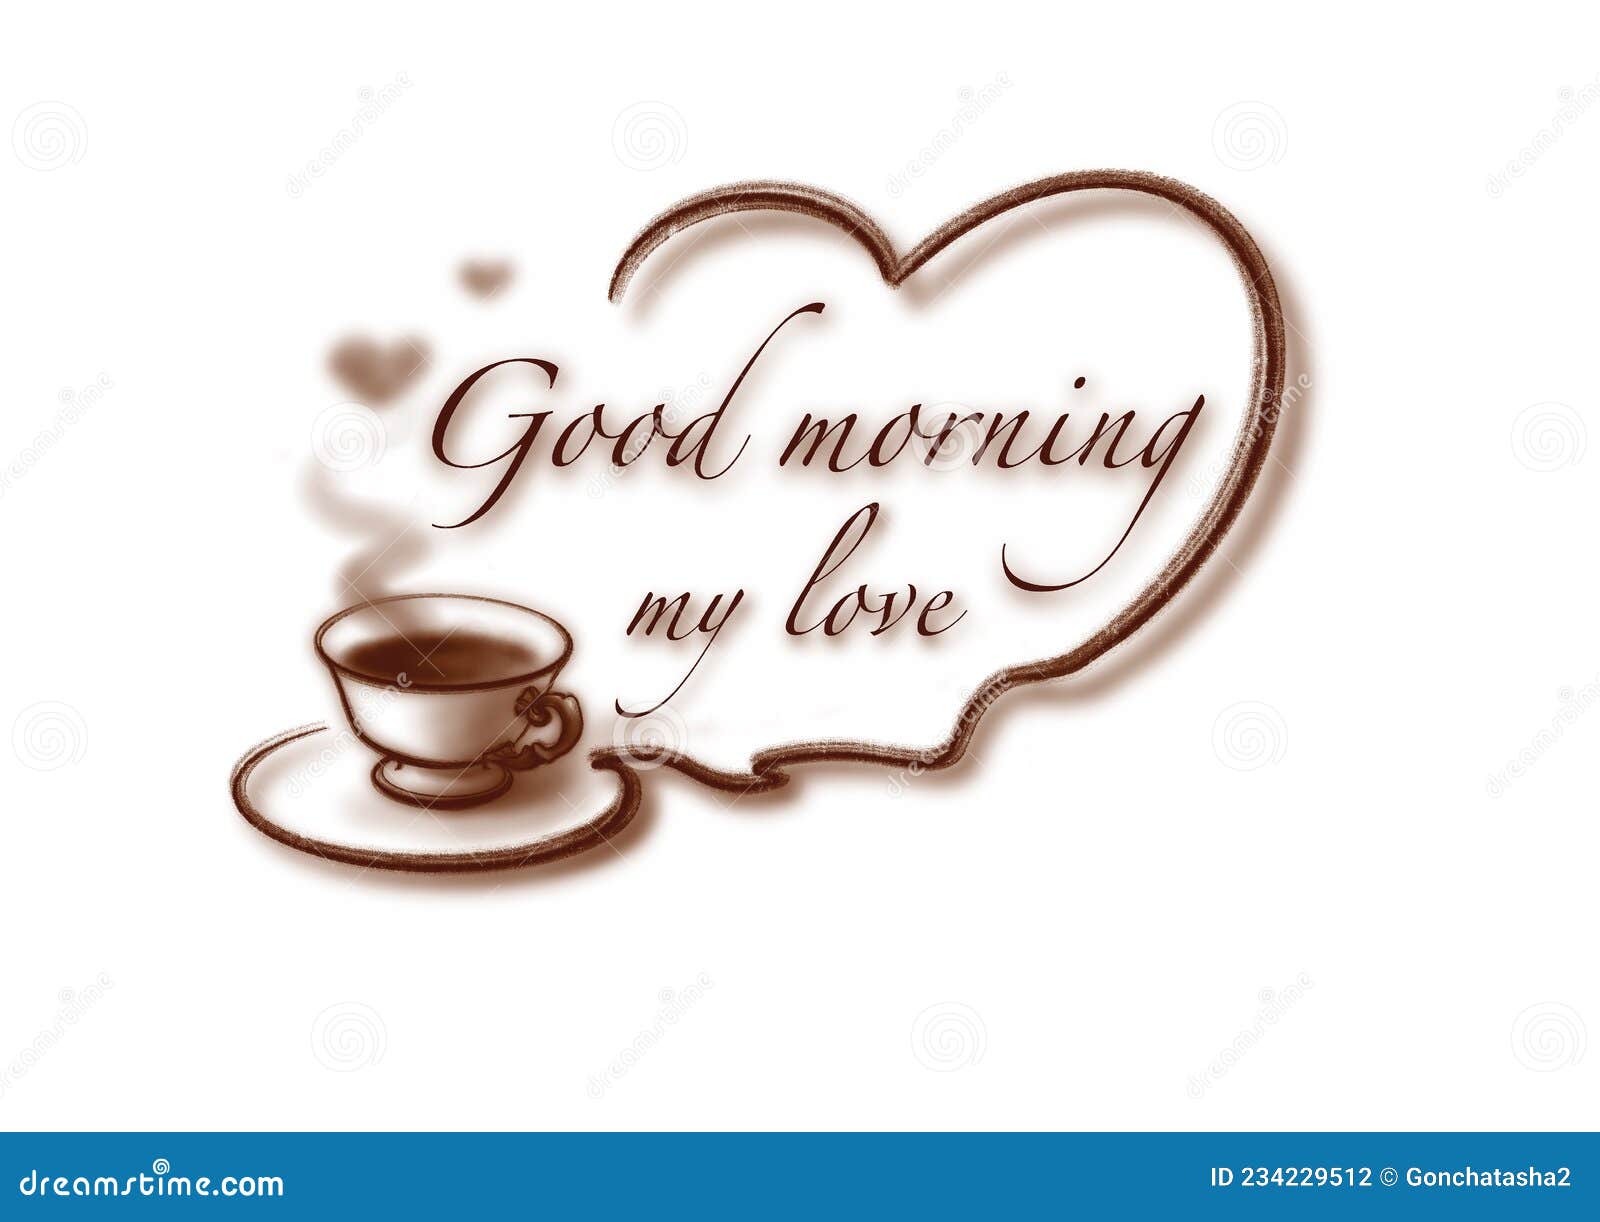 images of good morning my love